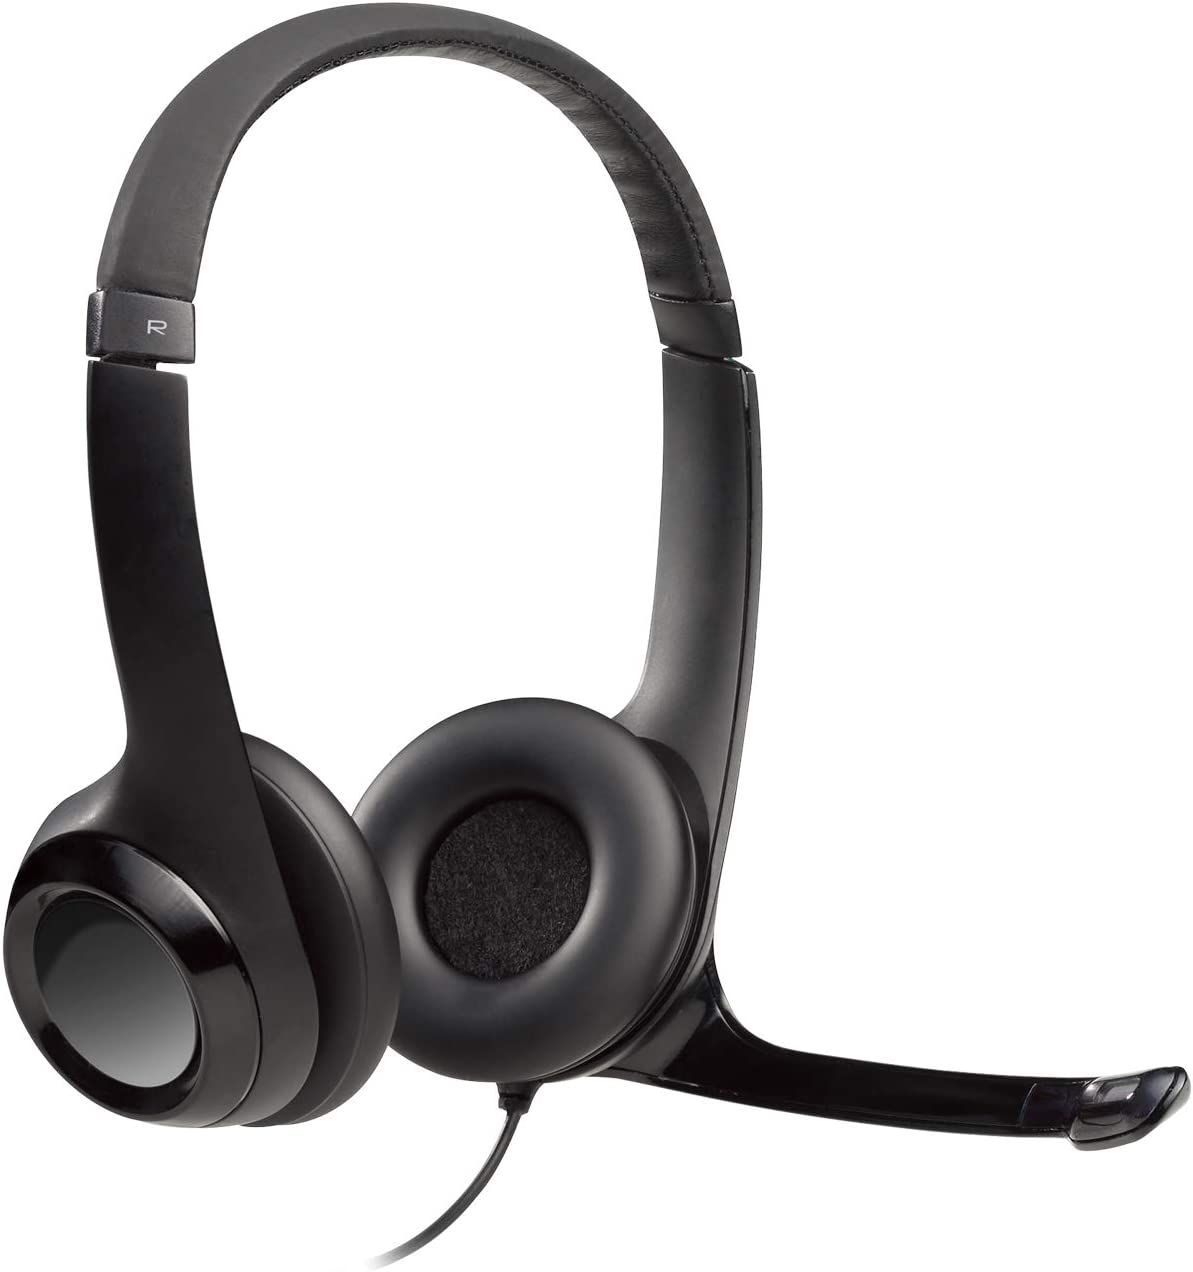 Angled view of the Logitech H390 headset